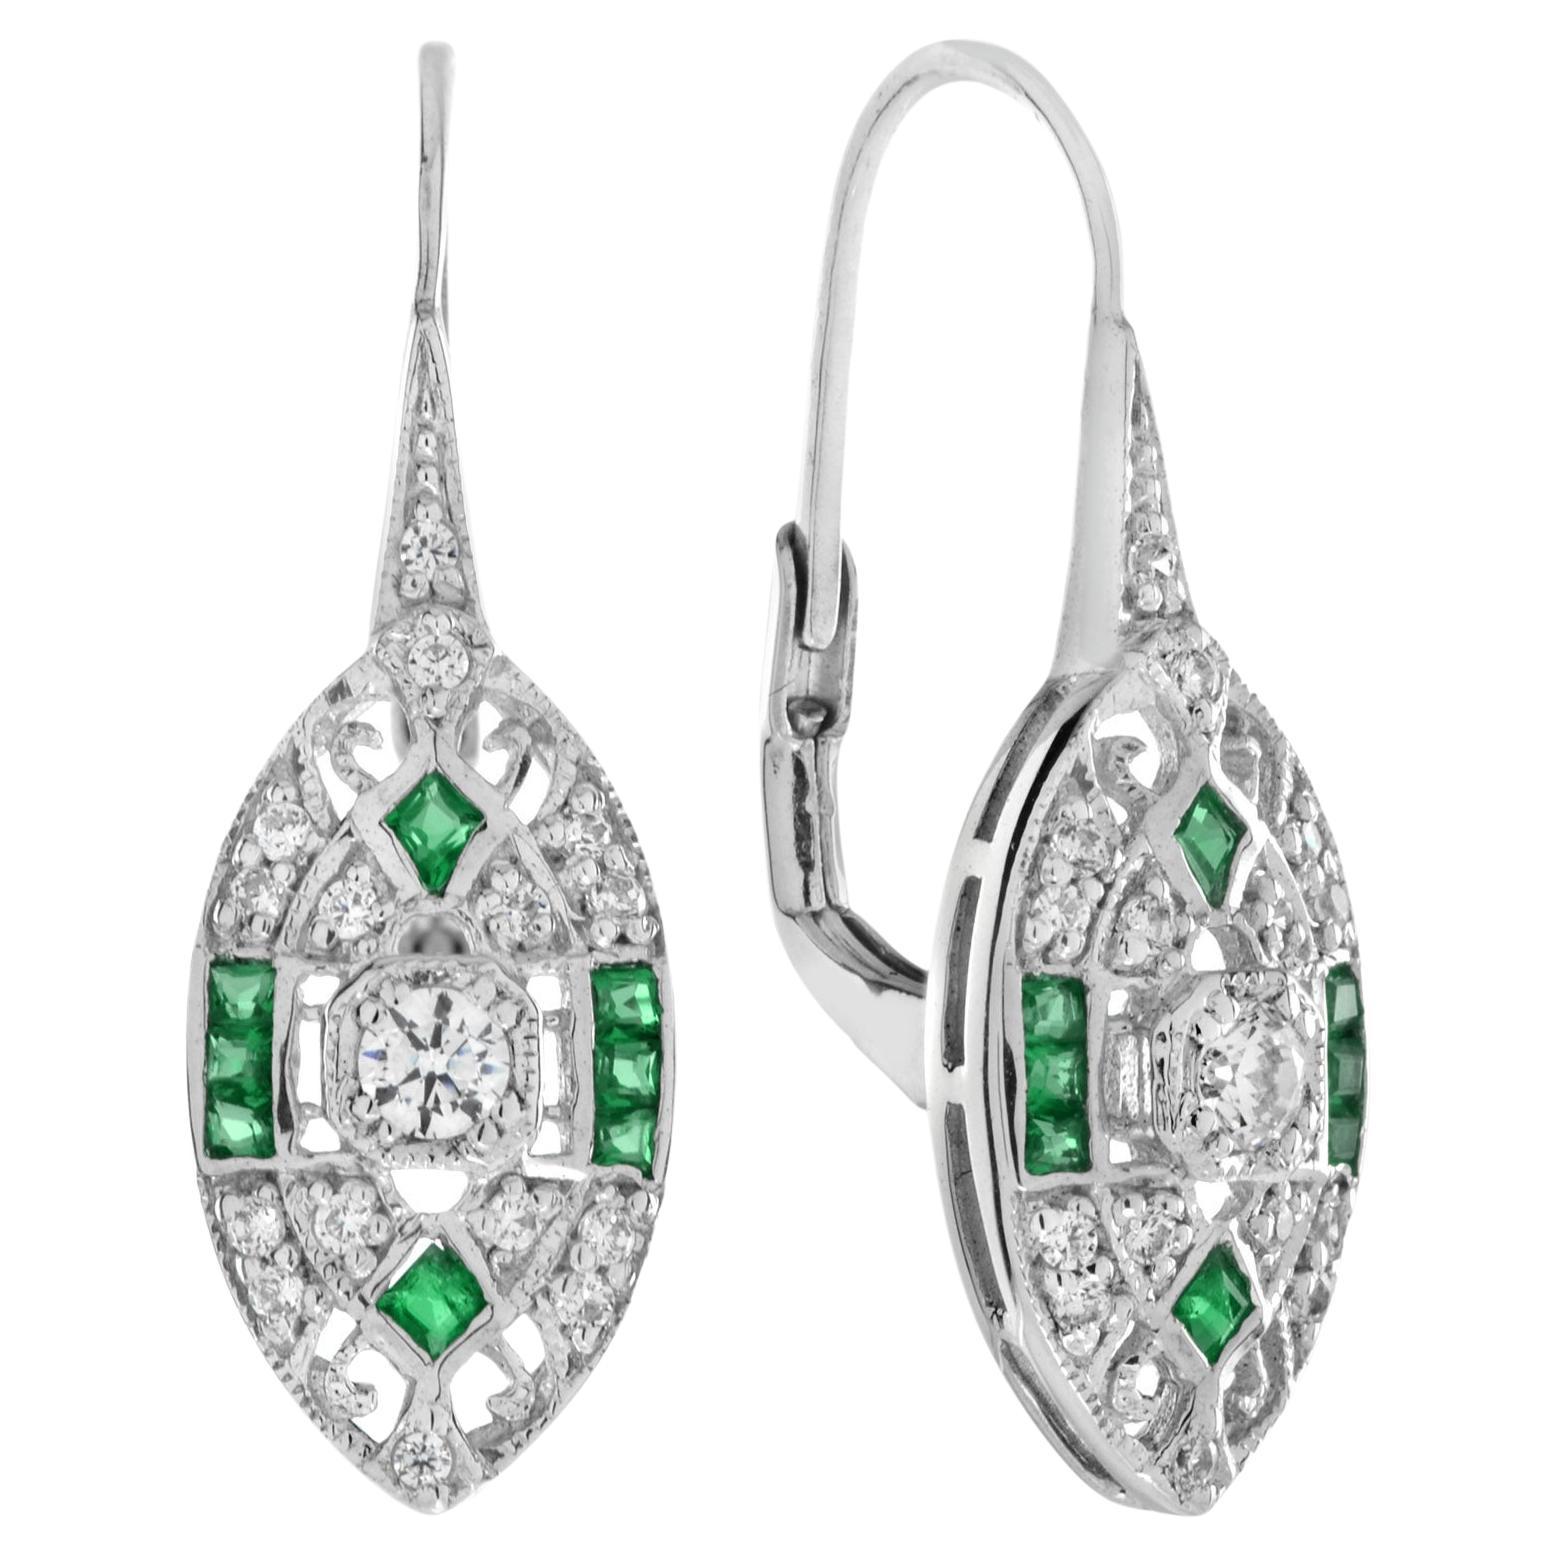 Round Cut Art Deco Style Round Diamond with Emerald Earrings in 14K White Gold For Sale